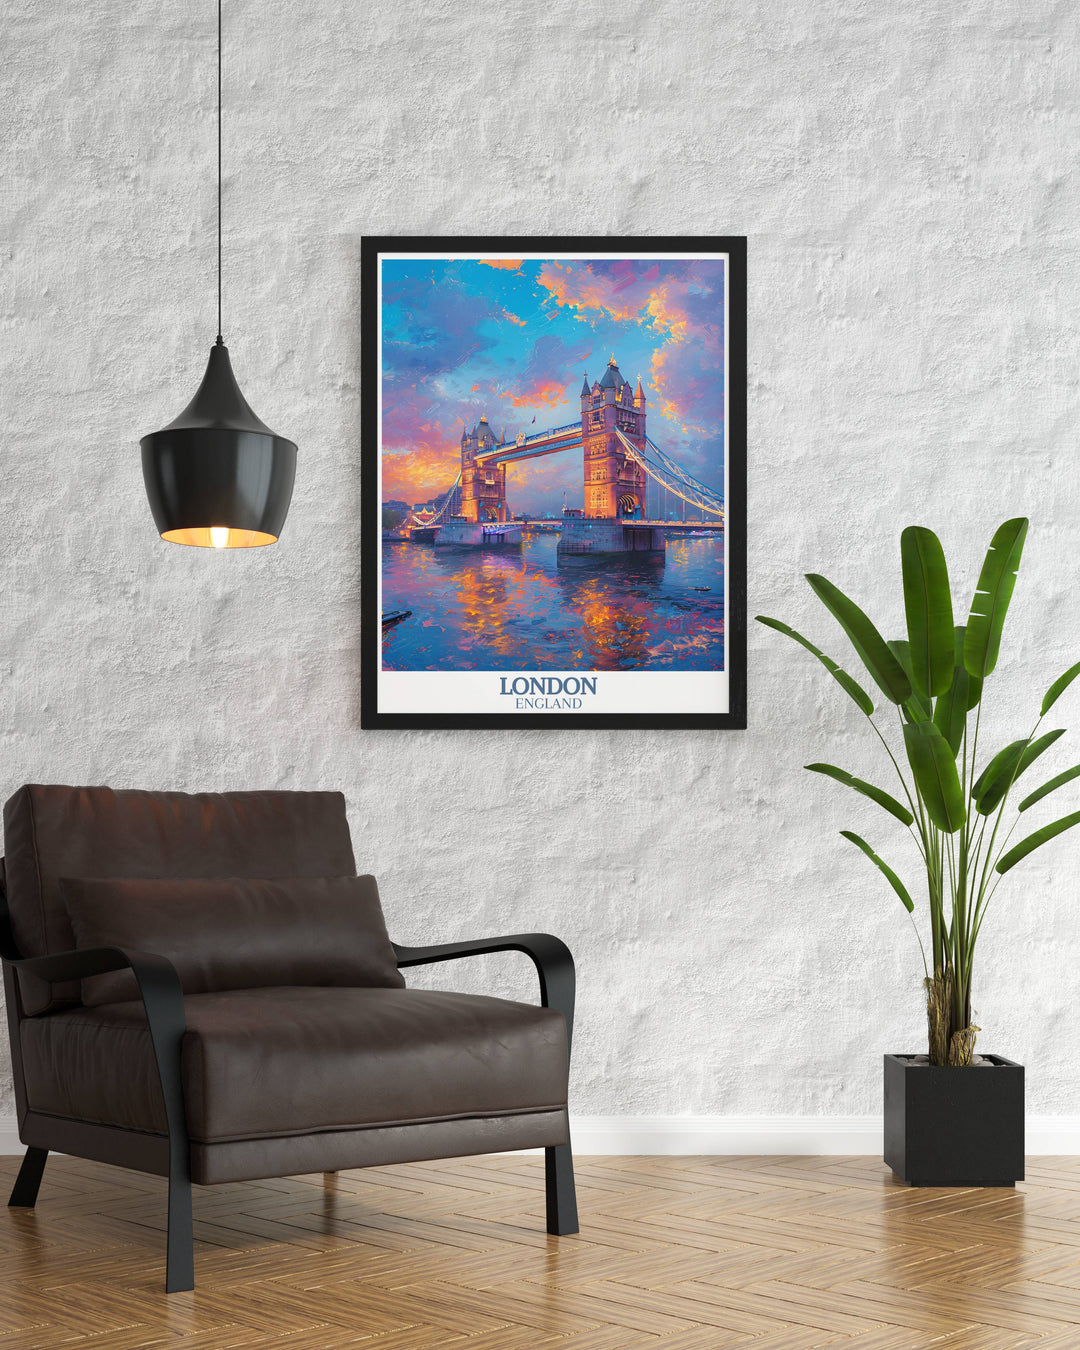 Vintage England poster, capturing the timeless beauty of Tower Bridge and other historic sites.